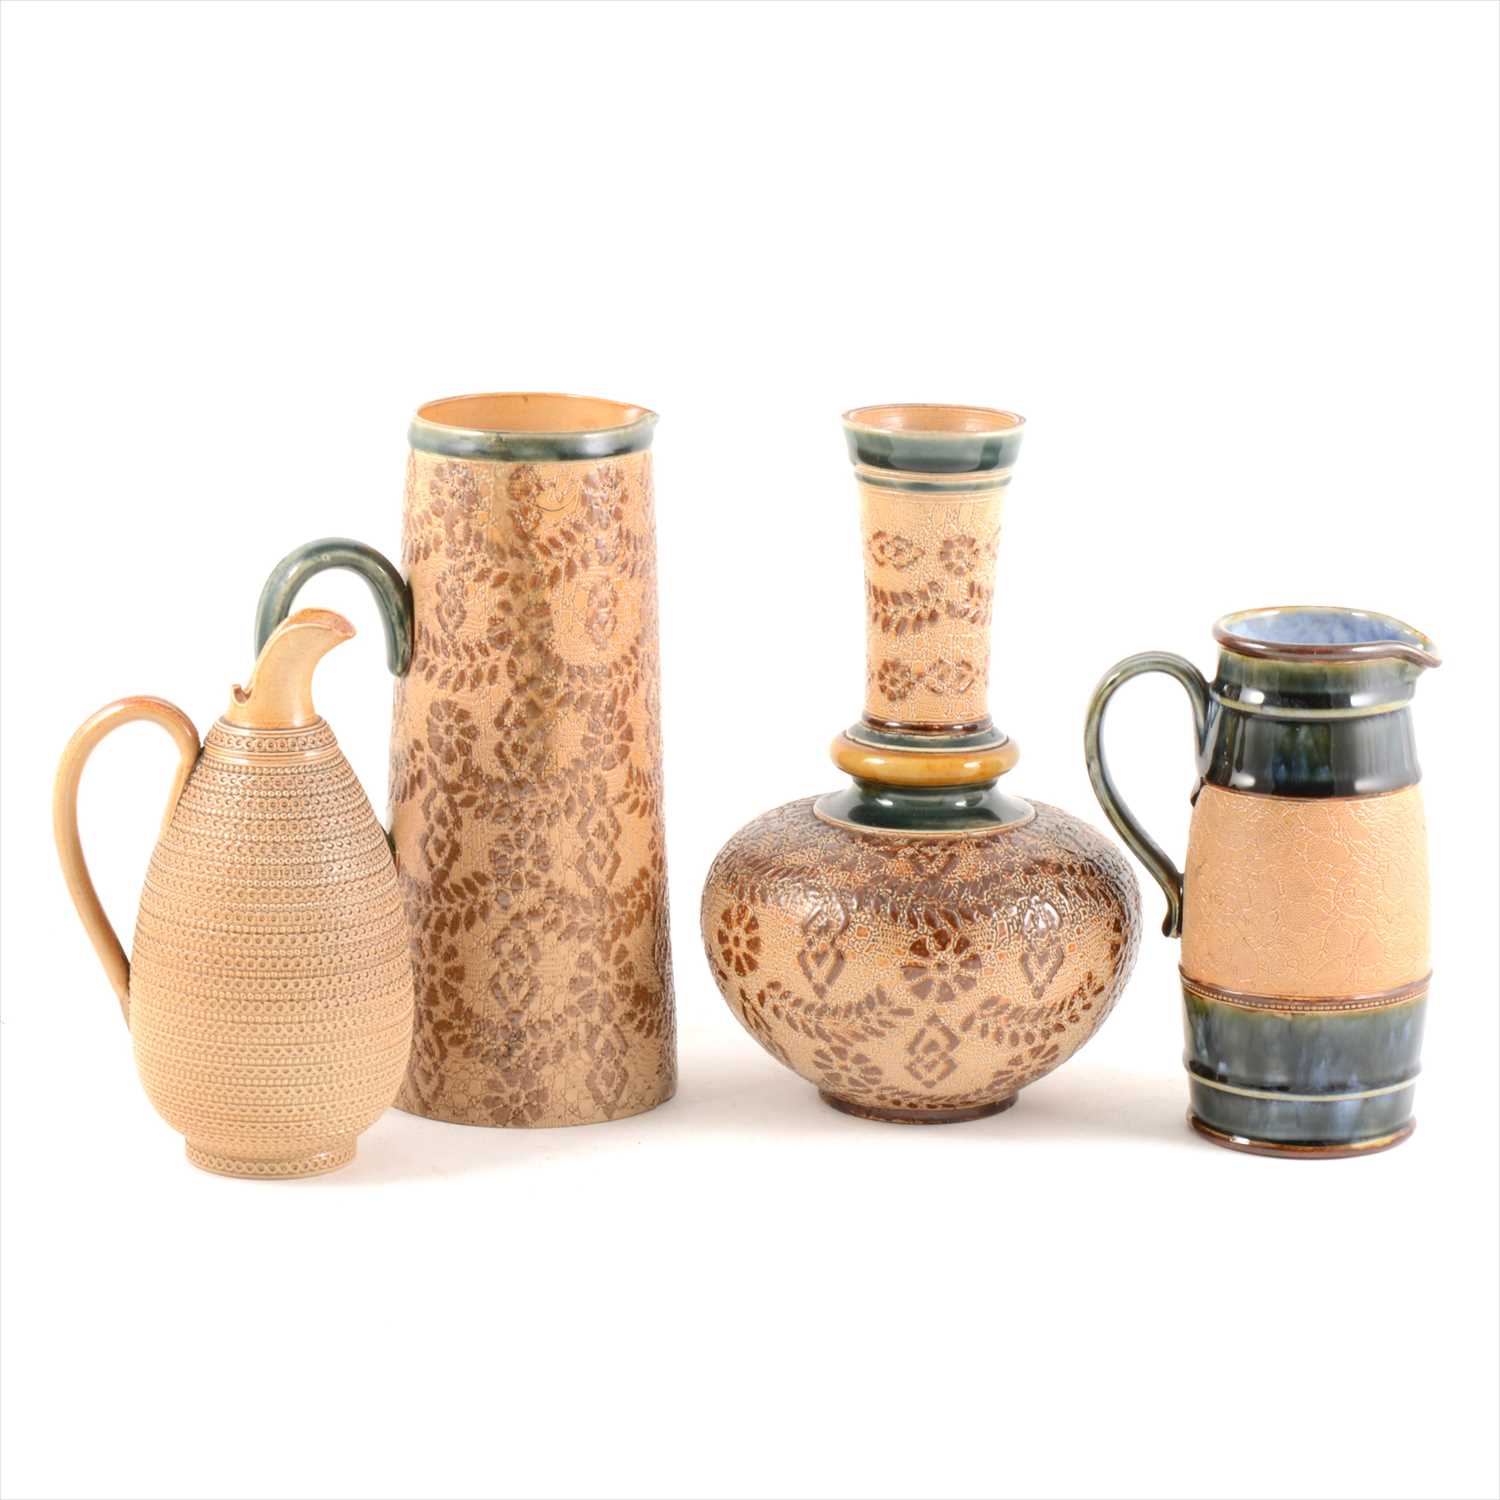 Lot 65 - Four stoneware items by Doulton Slater's Patent